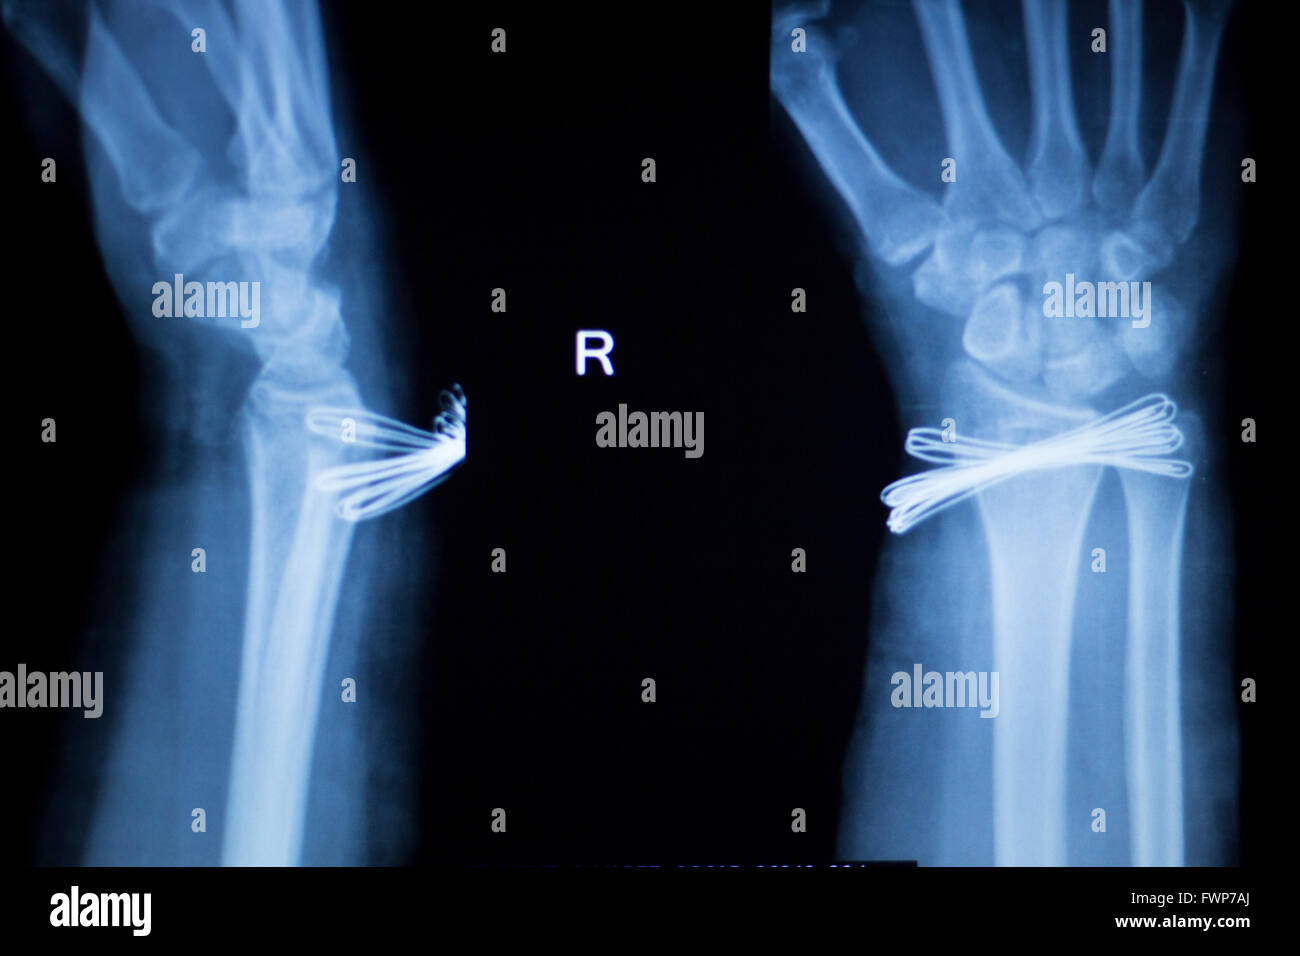 Wrist Hand Forearm And Arm Injury Medical X Ray Test Scan Result For